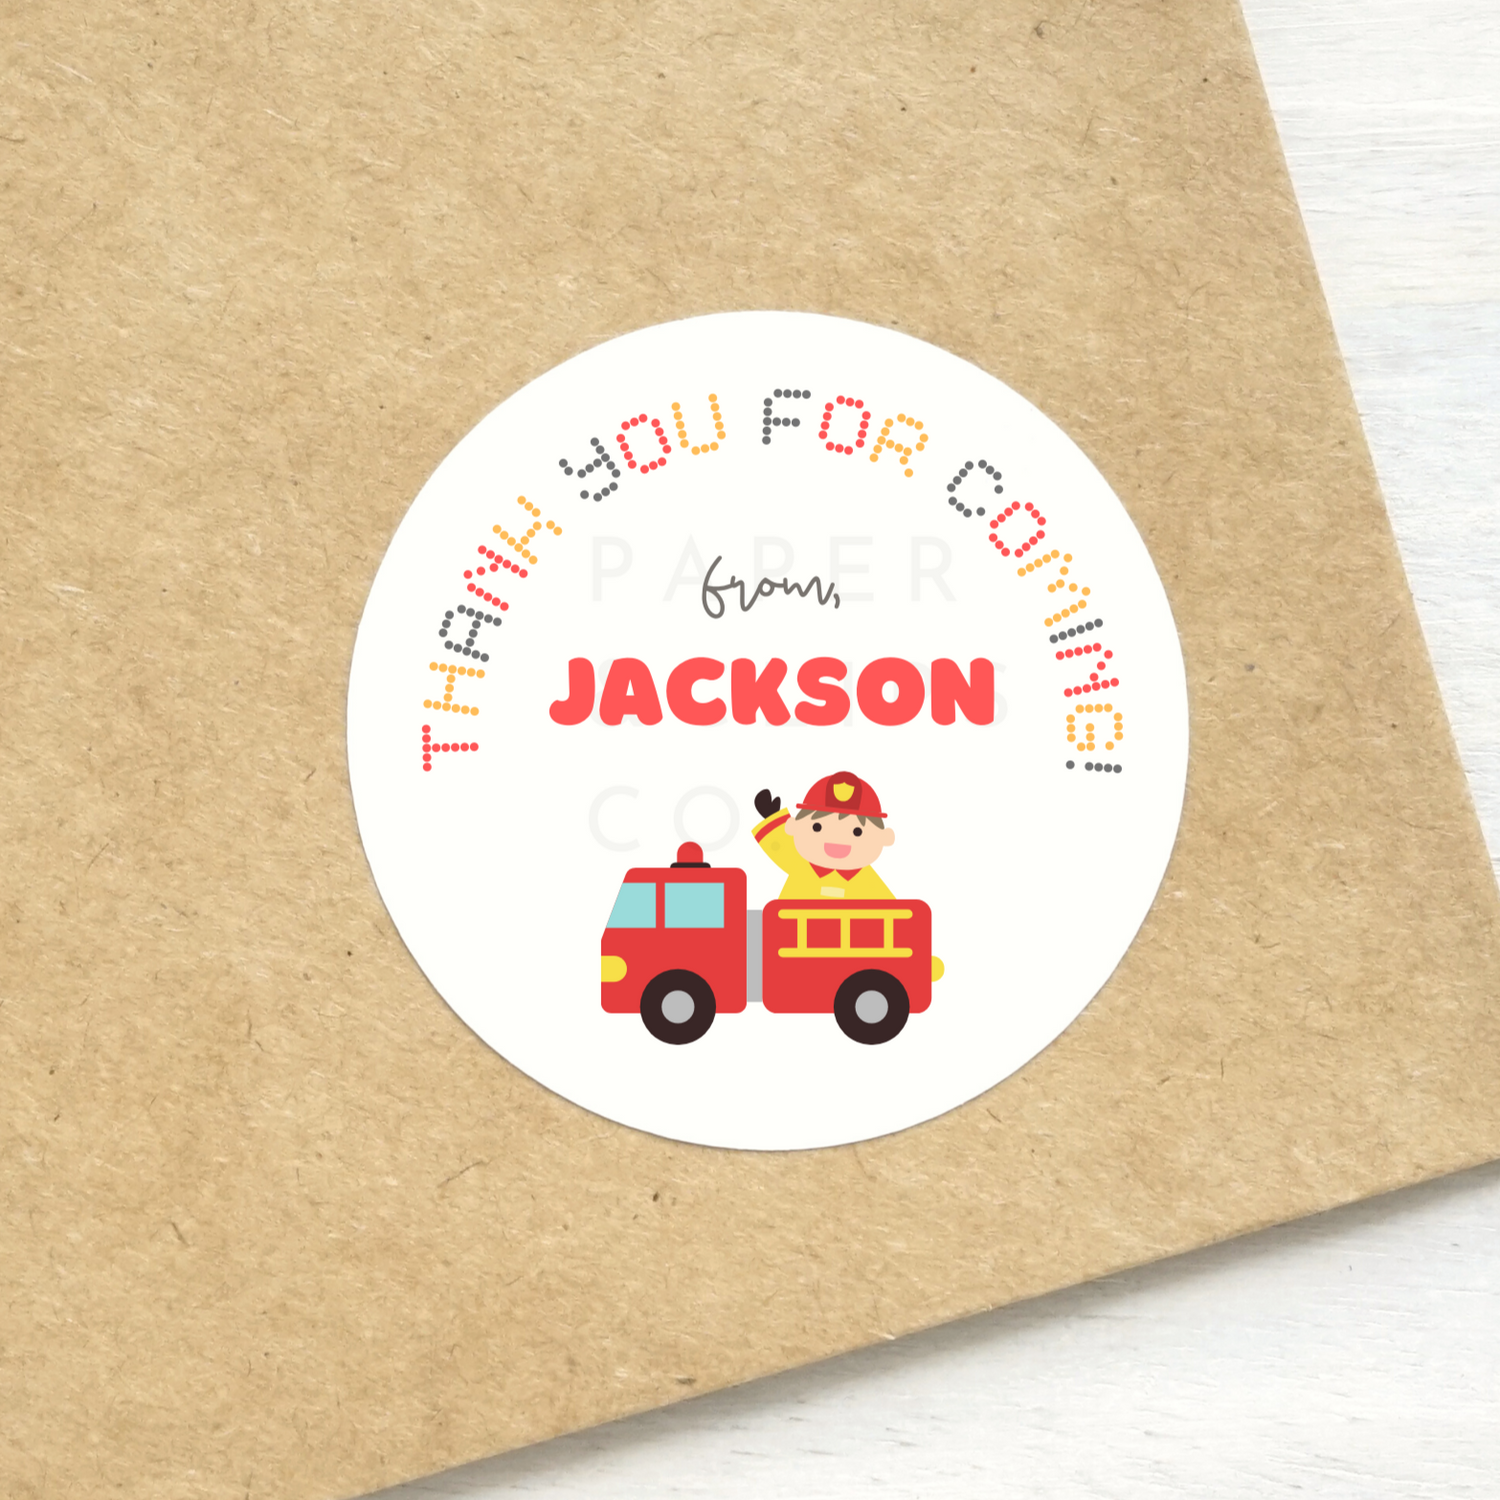 Personalized birthday stickers for firetruck theme birthday parties. Personalized name with Thank You for Coming! Available in 1.5 and 2 inches printed on white matte sticker paper. Shipped from Toronto.